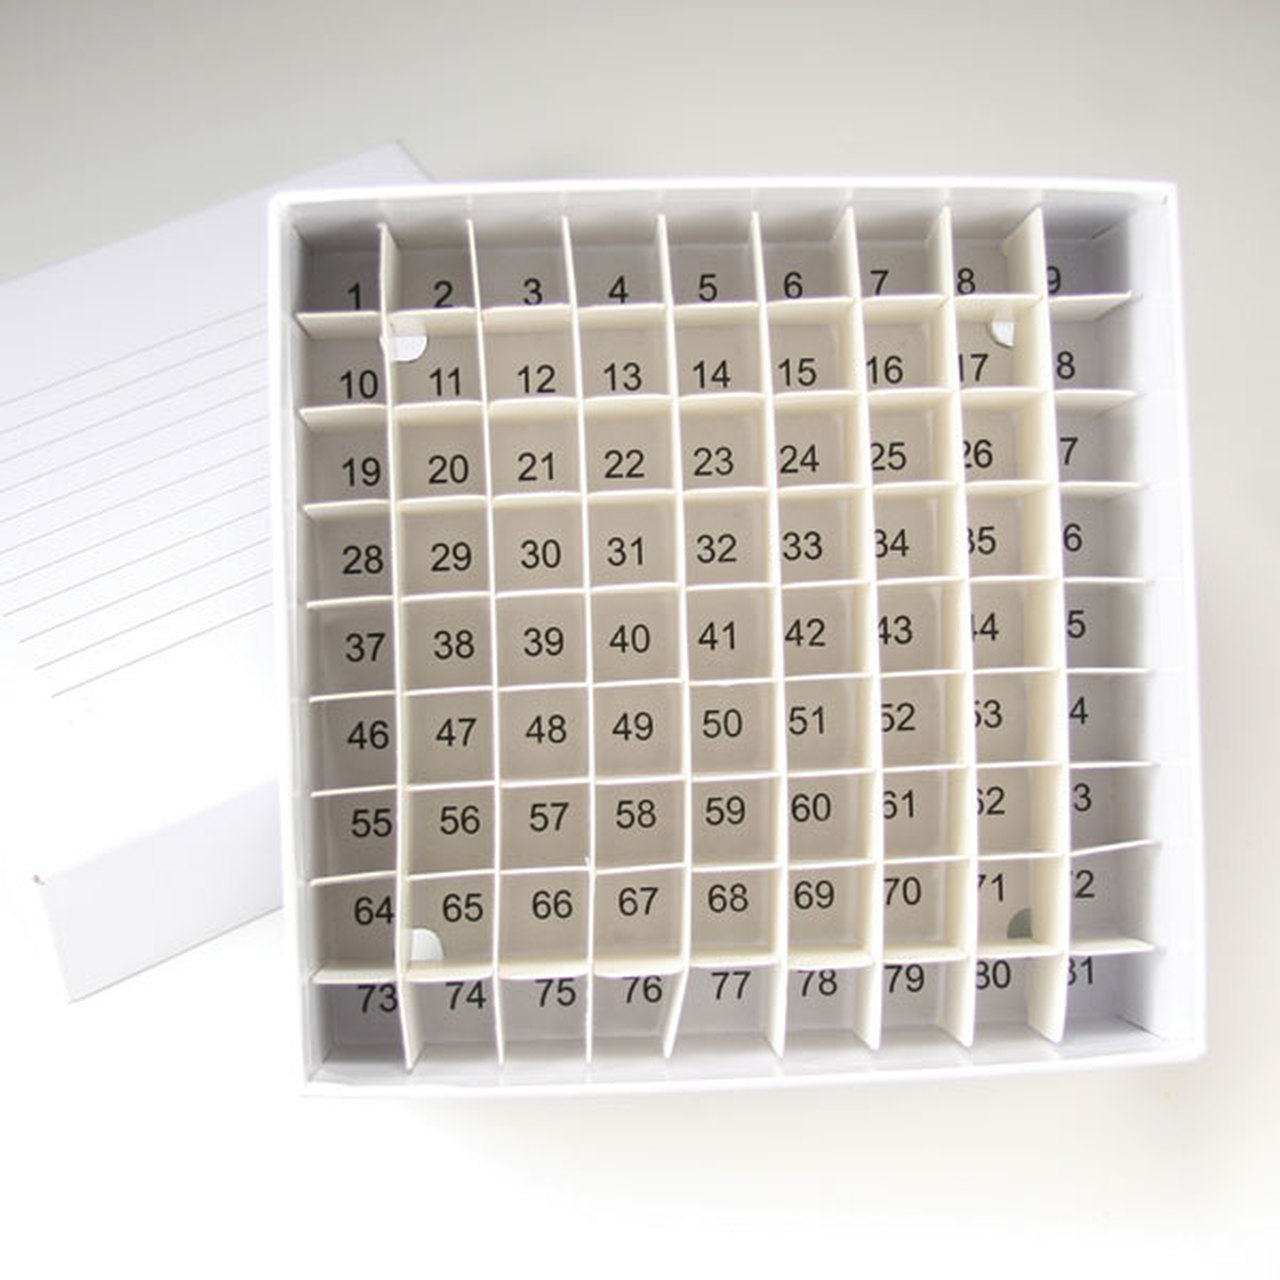 These Cardboard Freezer Boxes Keep Your Samples Safe And Keep You From  Making a Costly Error - Stellar Scientific